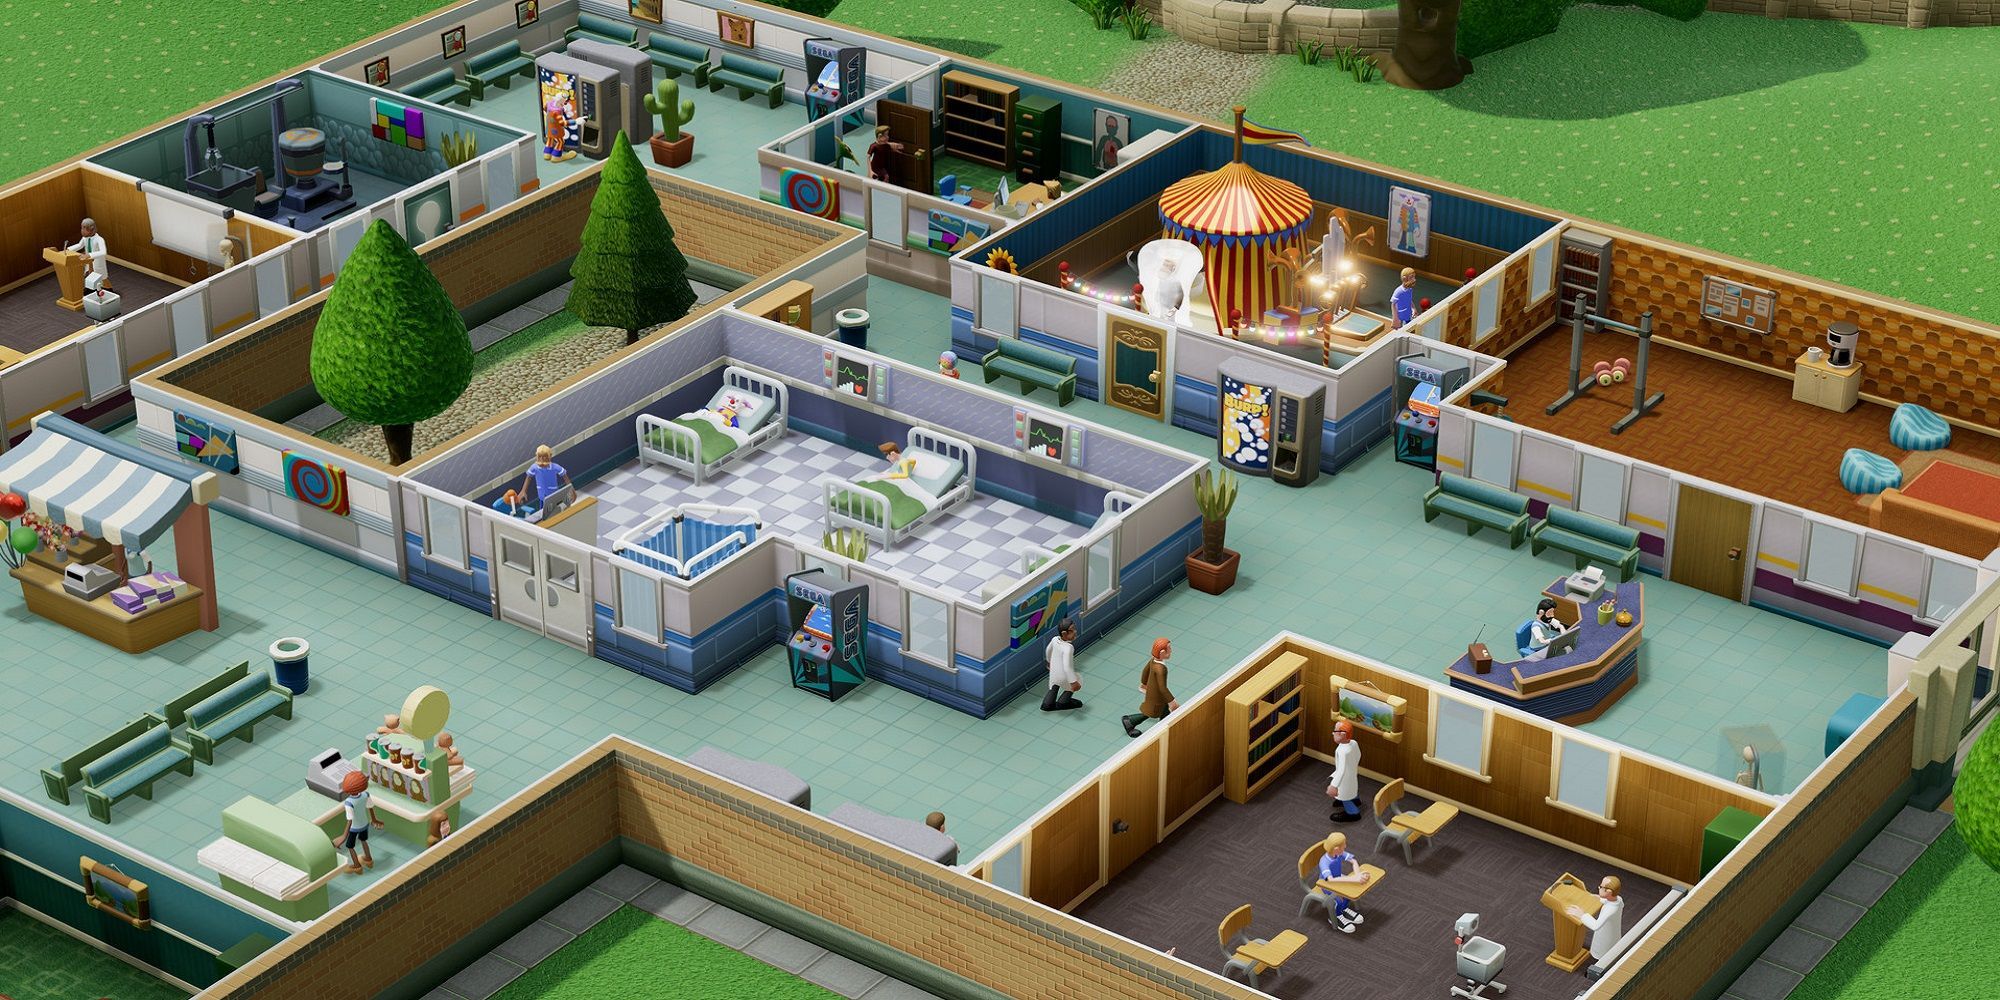 A hospital in Two Point Hospital